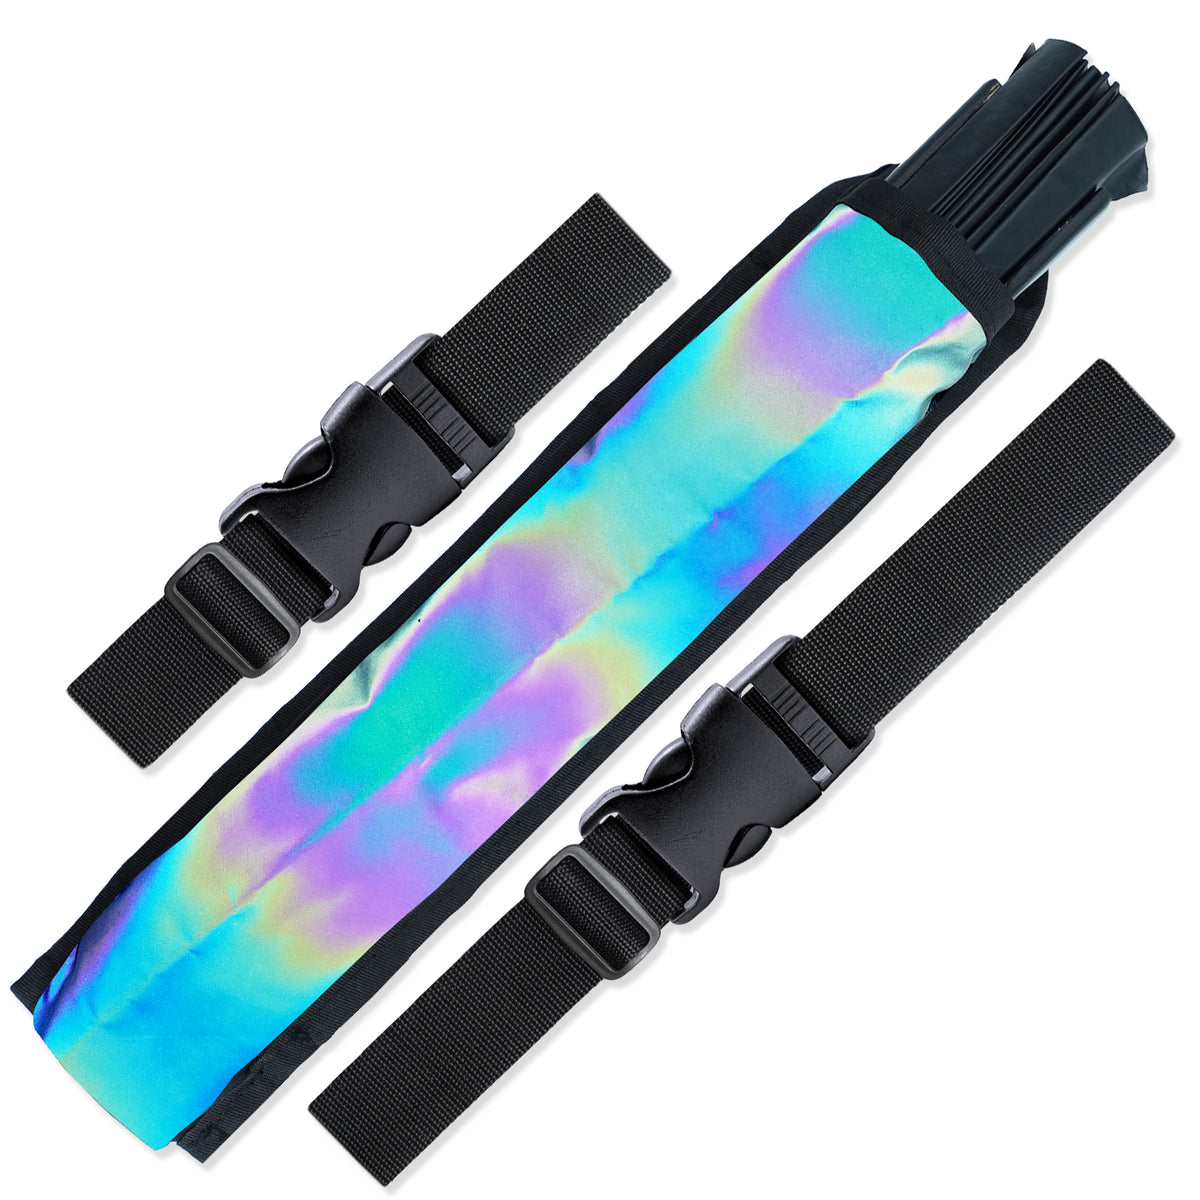 Rave Fan Holster - Rave Fan Holder - Rave Festival Accessories | Hand Fan Holder & Thigh Holster for Rave Essentials Rainbow - Reflective